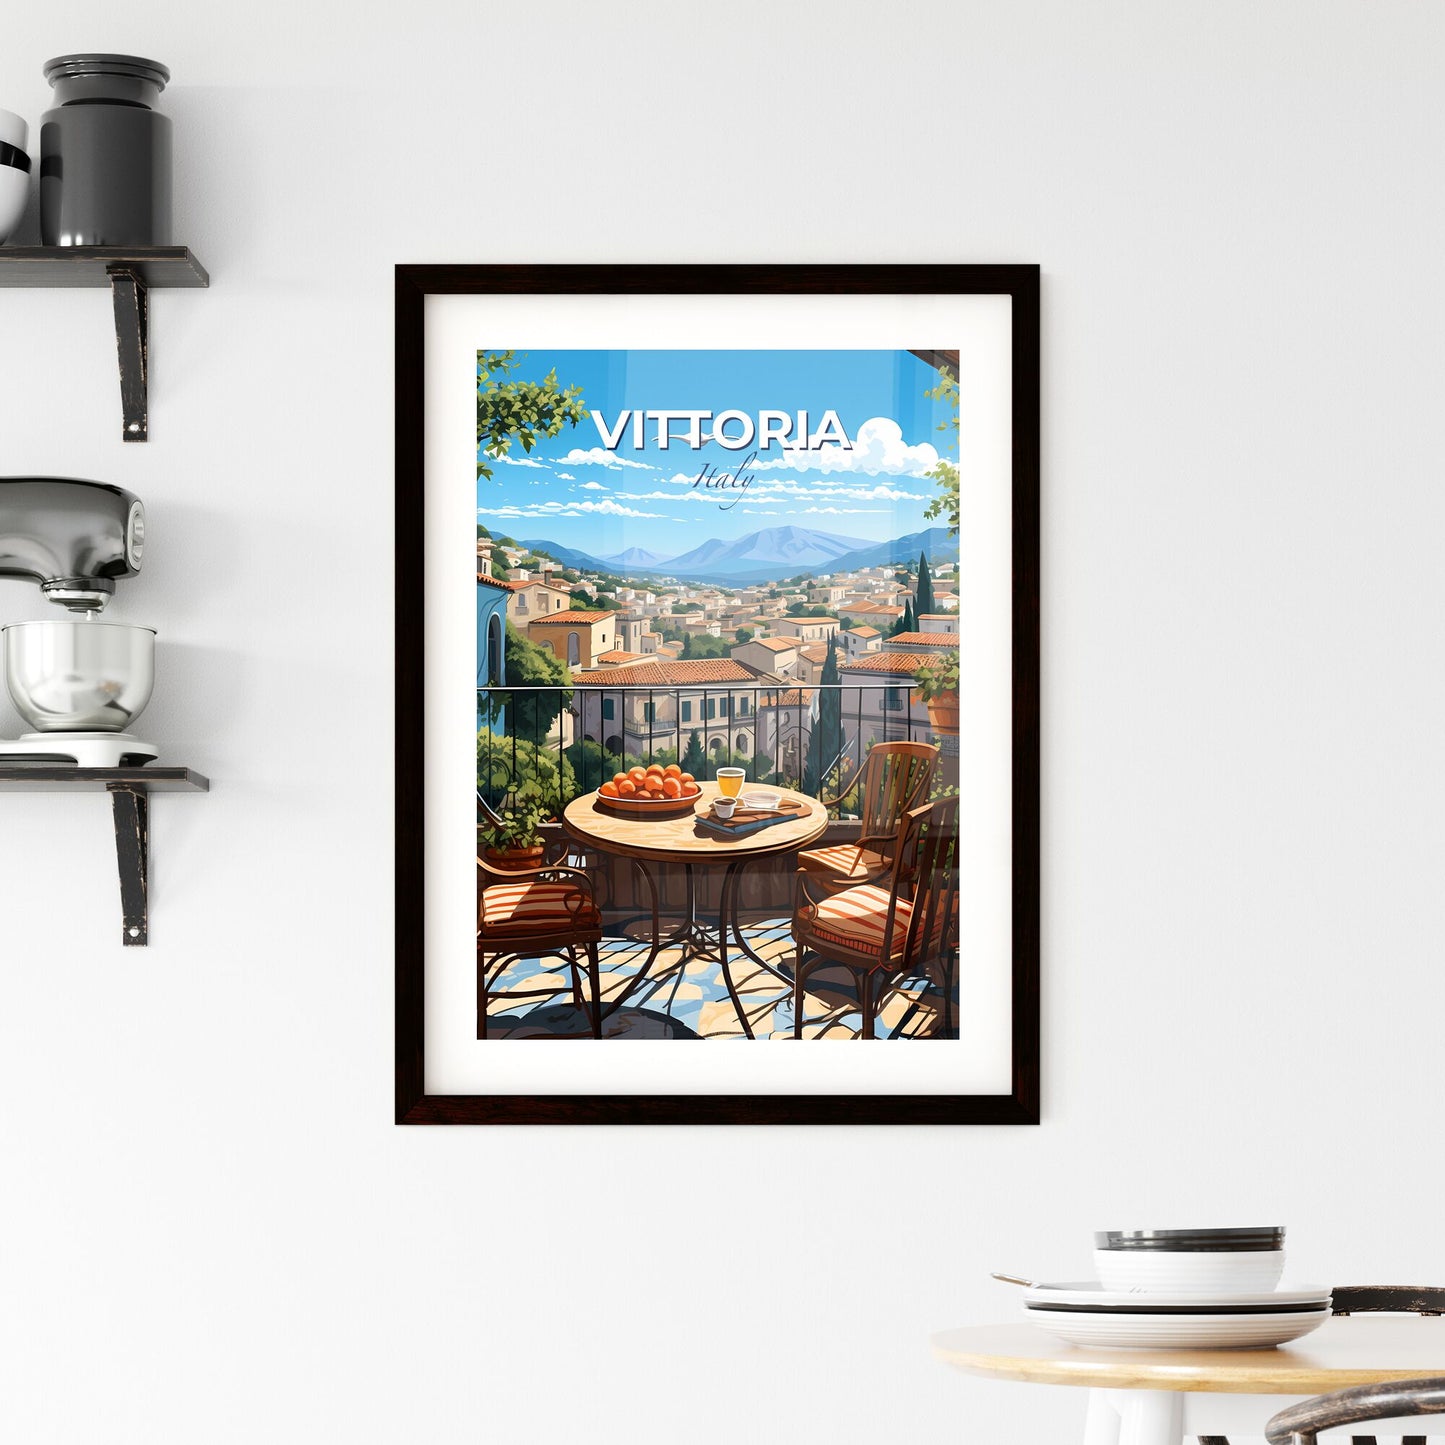 Vittoria, Italy, A Poster of a table with oranges and a cup of tea on a balcony overlooking a city Default Title